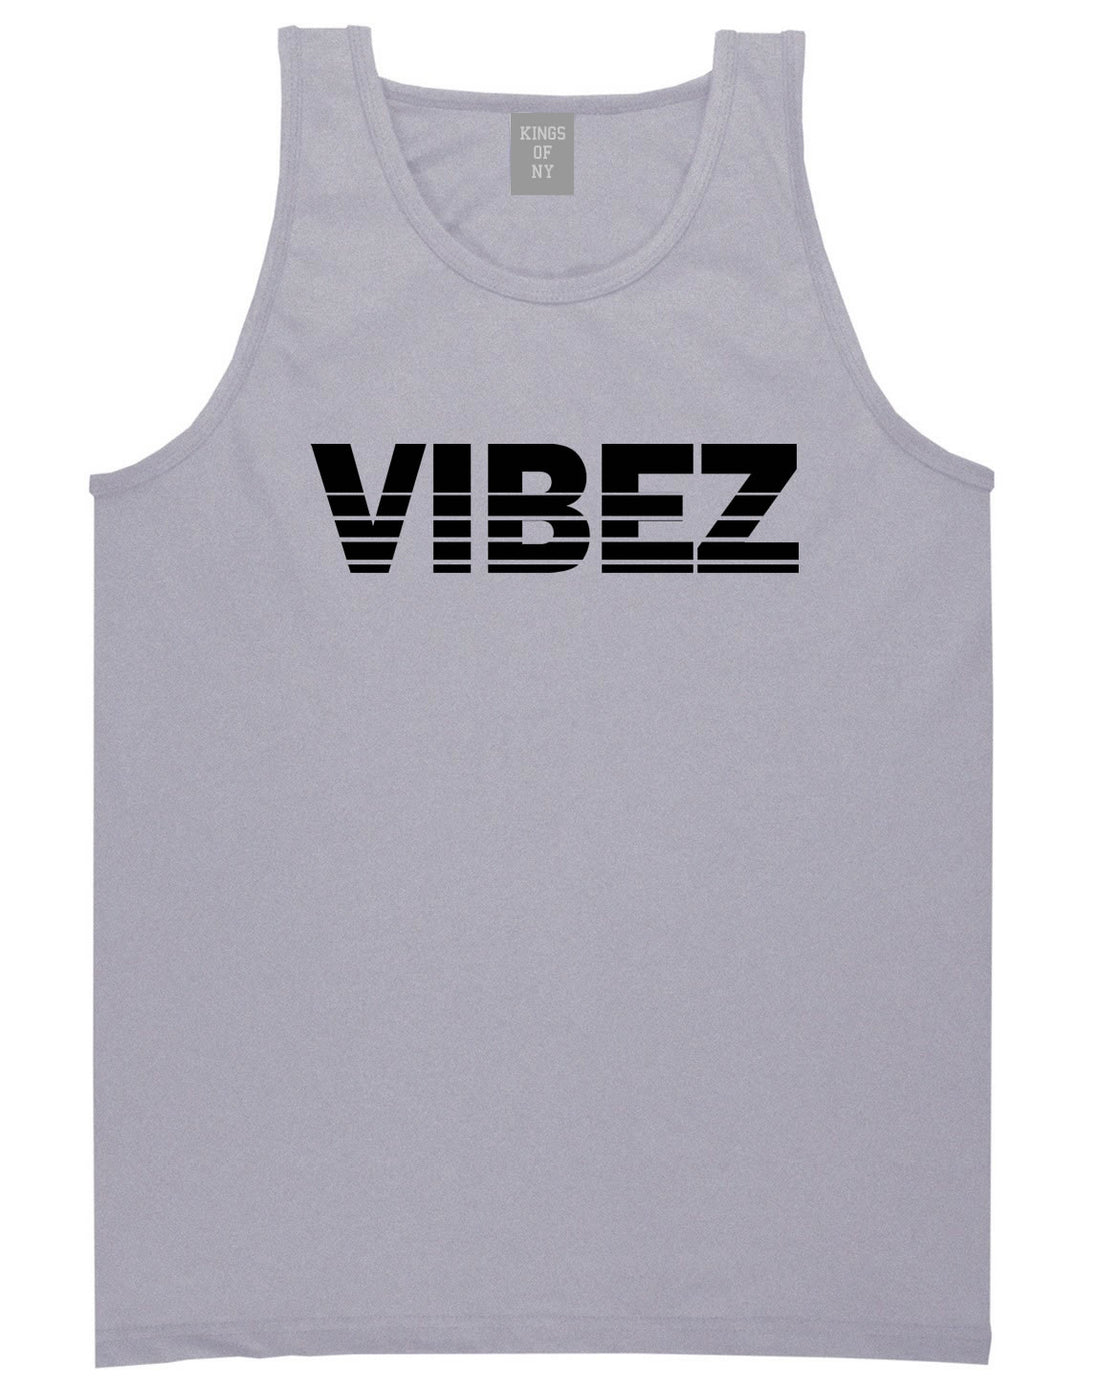 VIBEZ Racing Style Tank Top in Grey by Kings Of NY